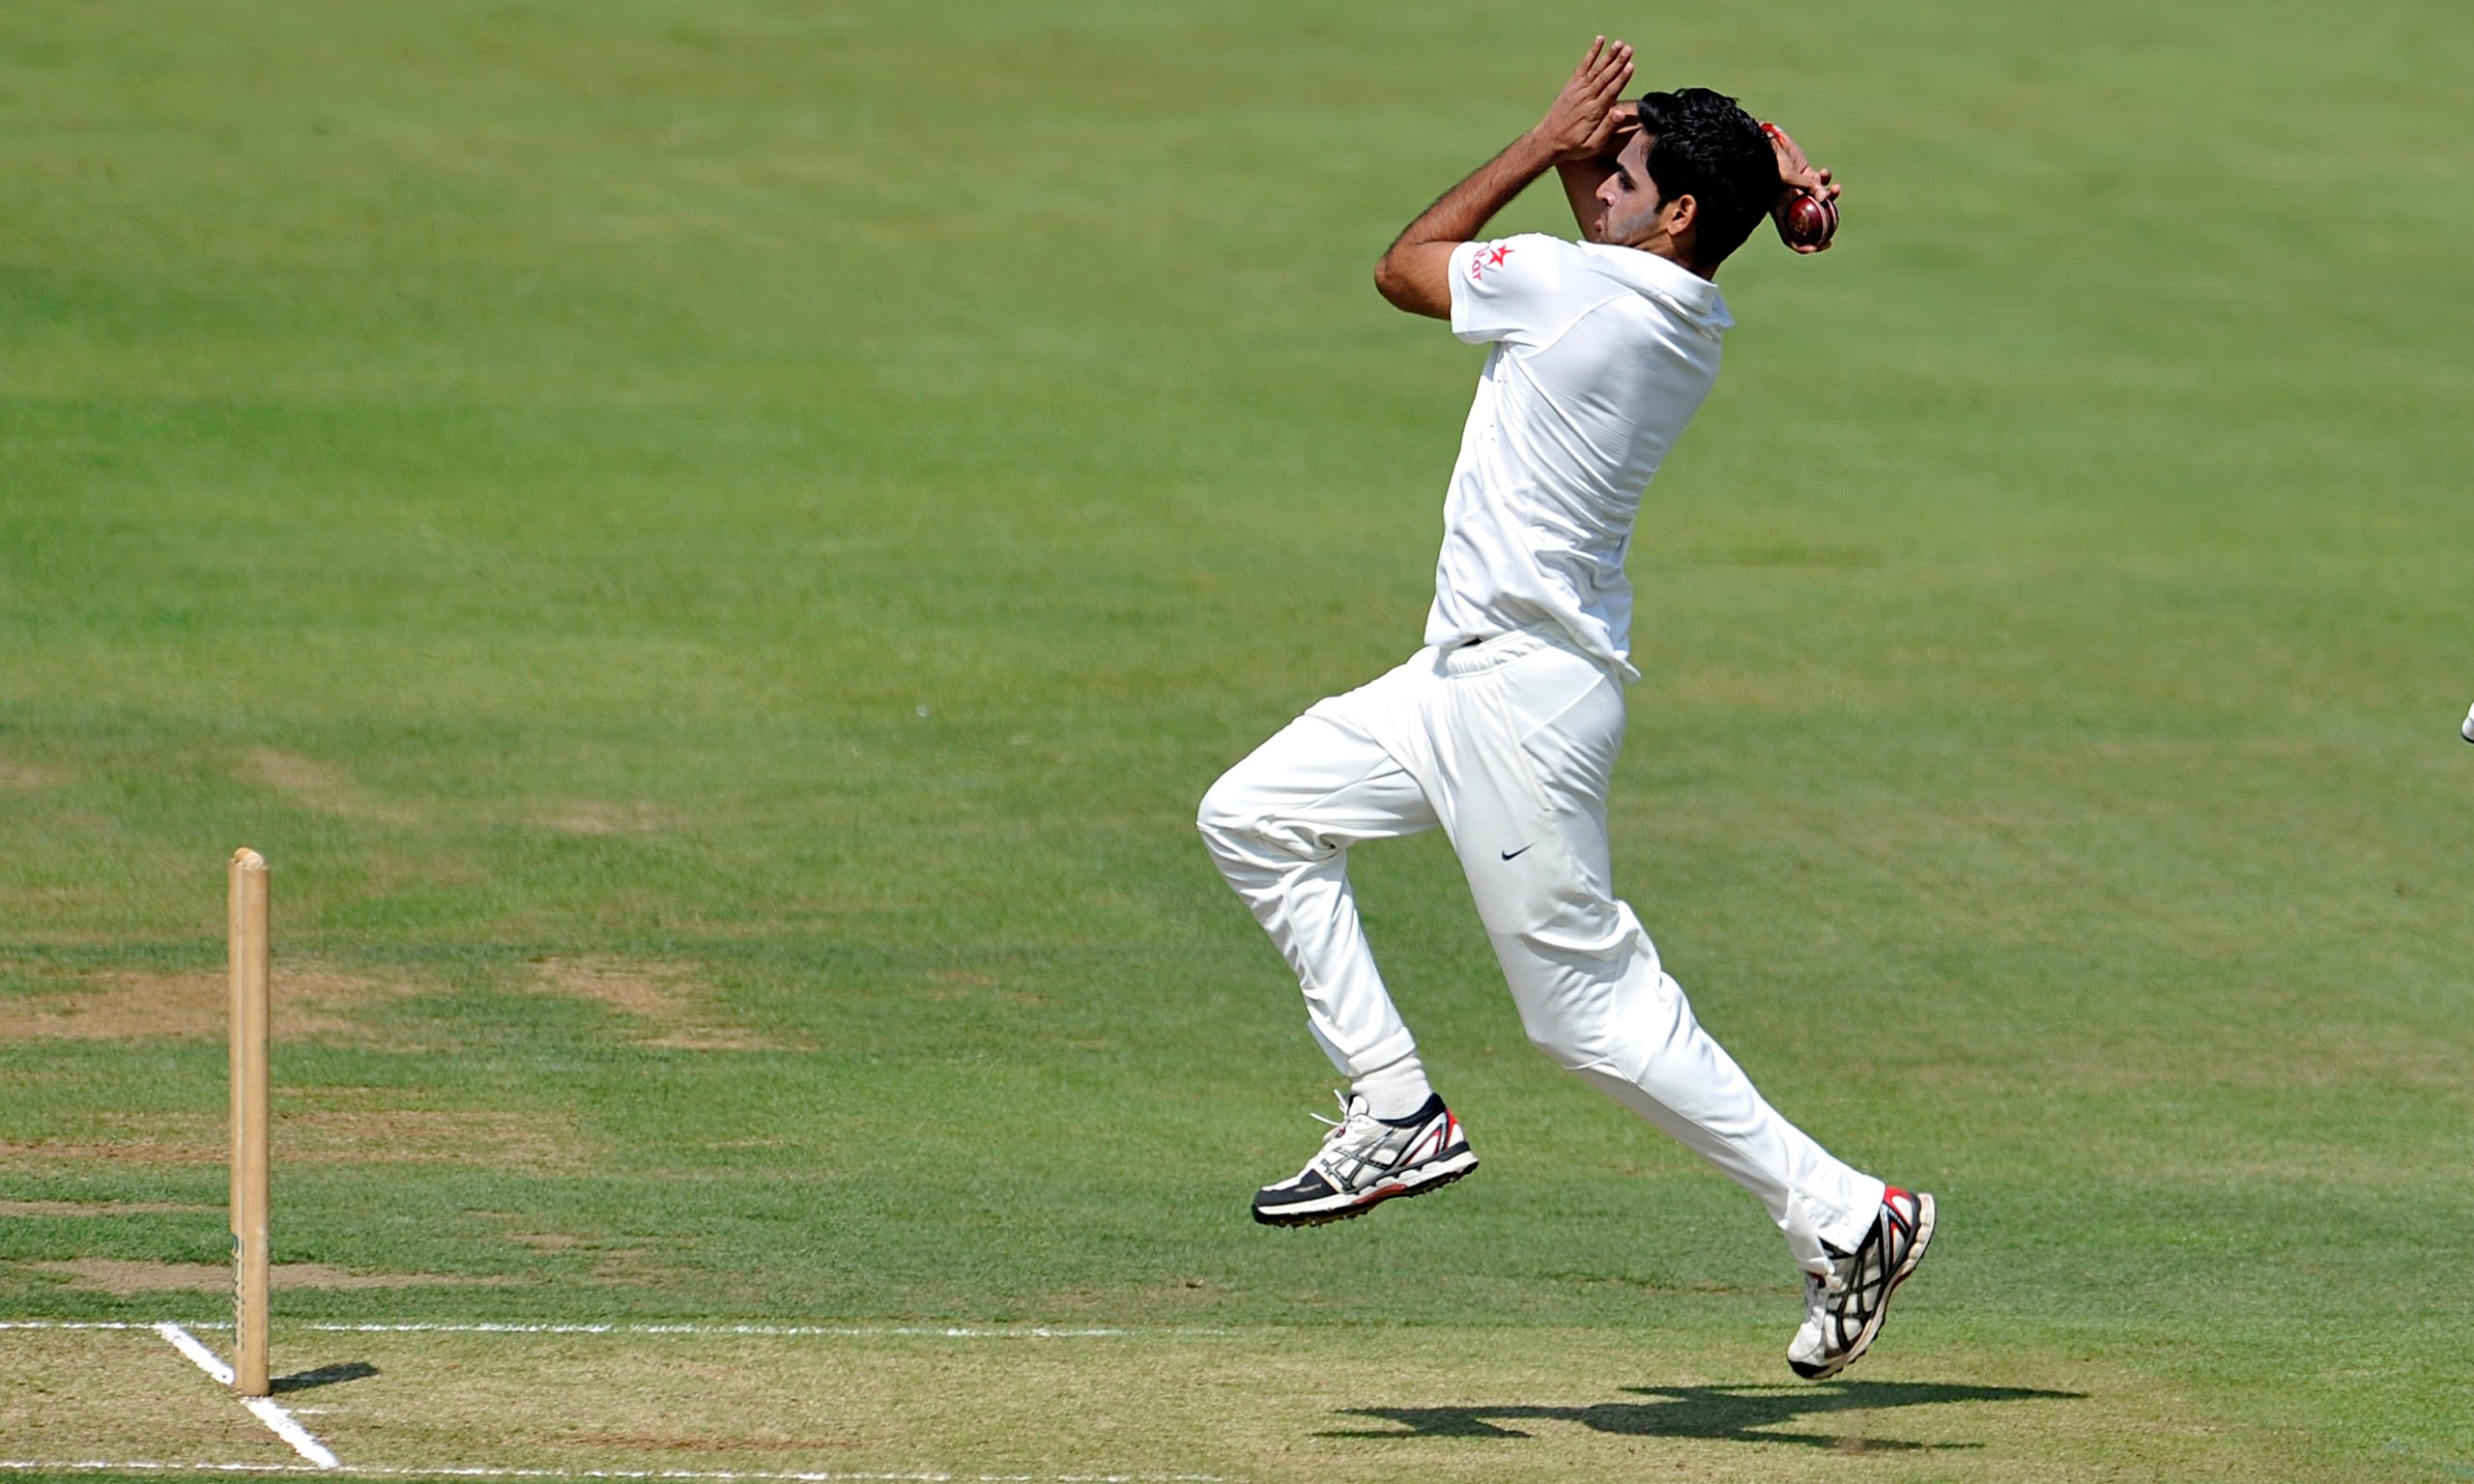 5-bowling-actions-to-learn-when-you-start-playing-cricket-playo